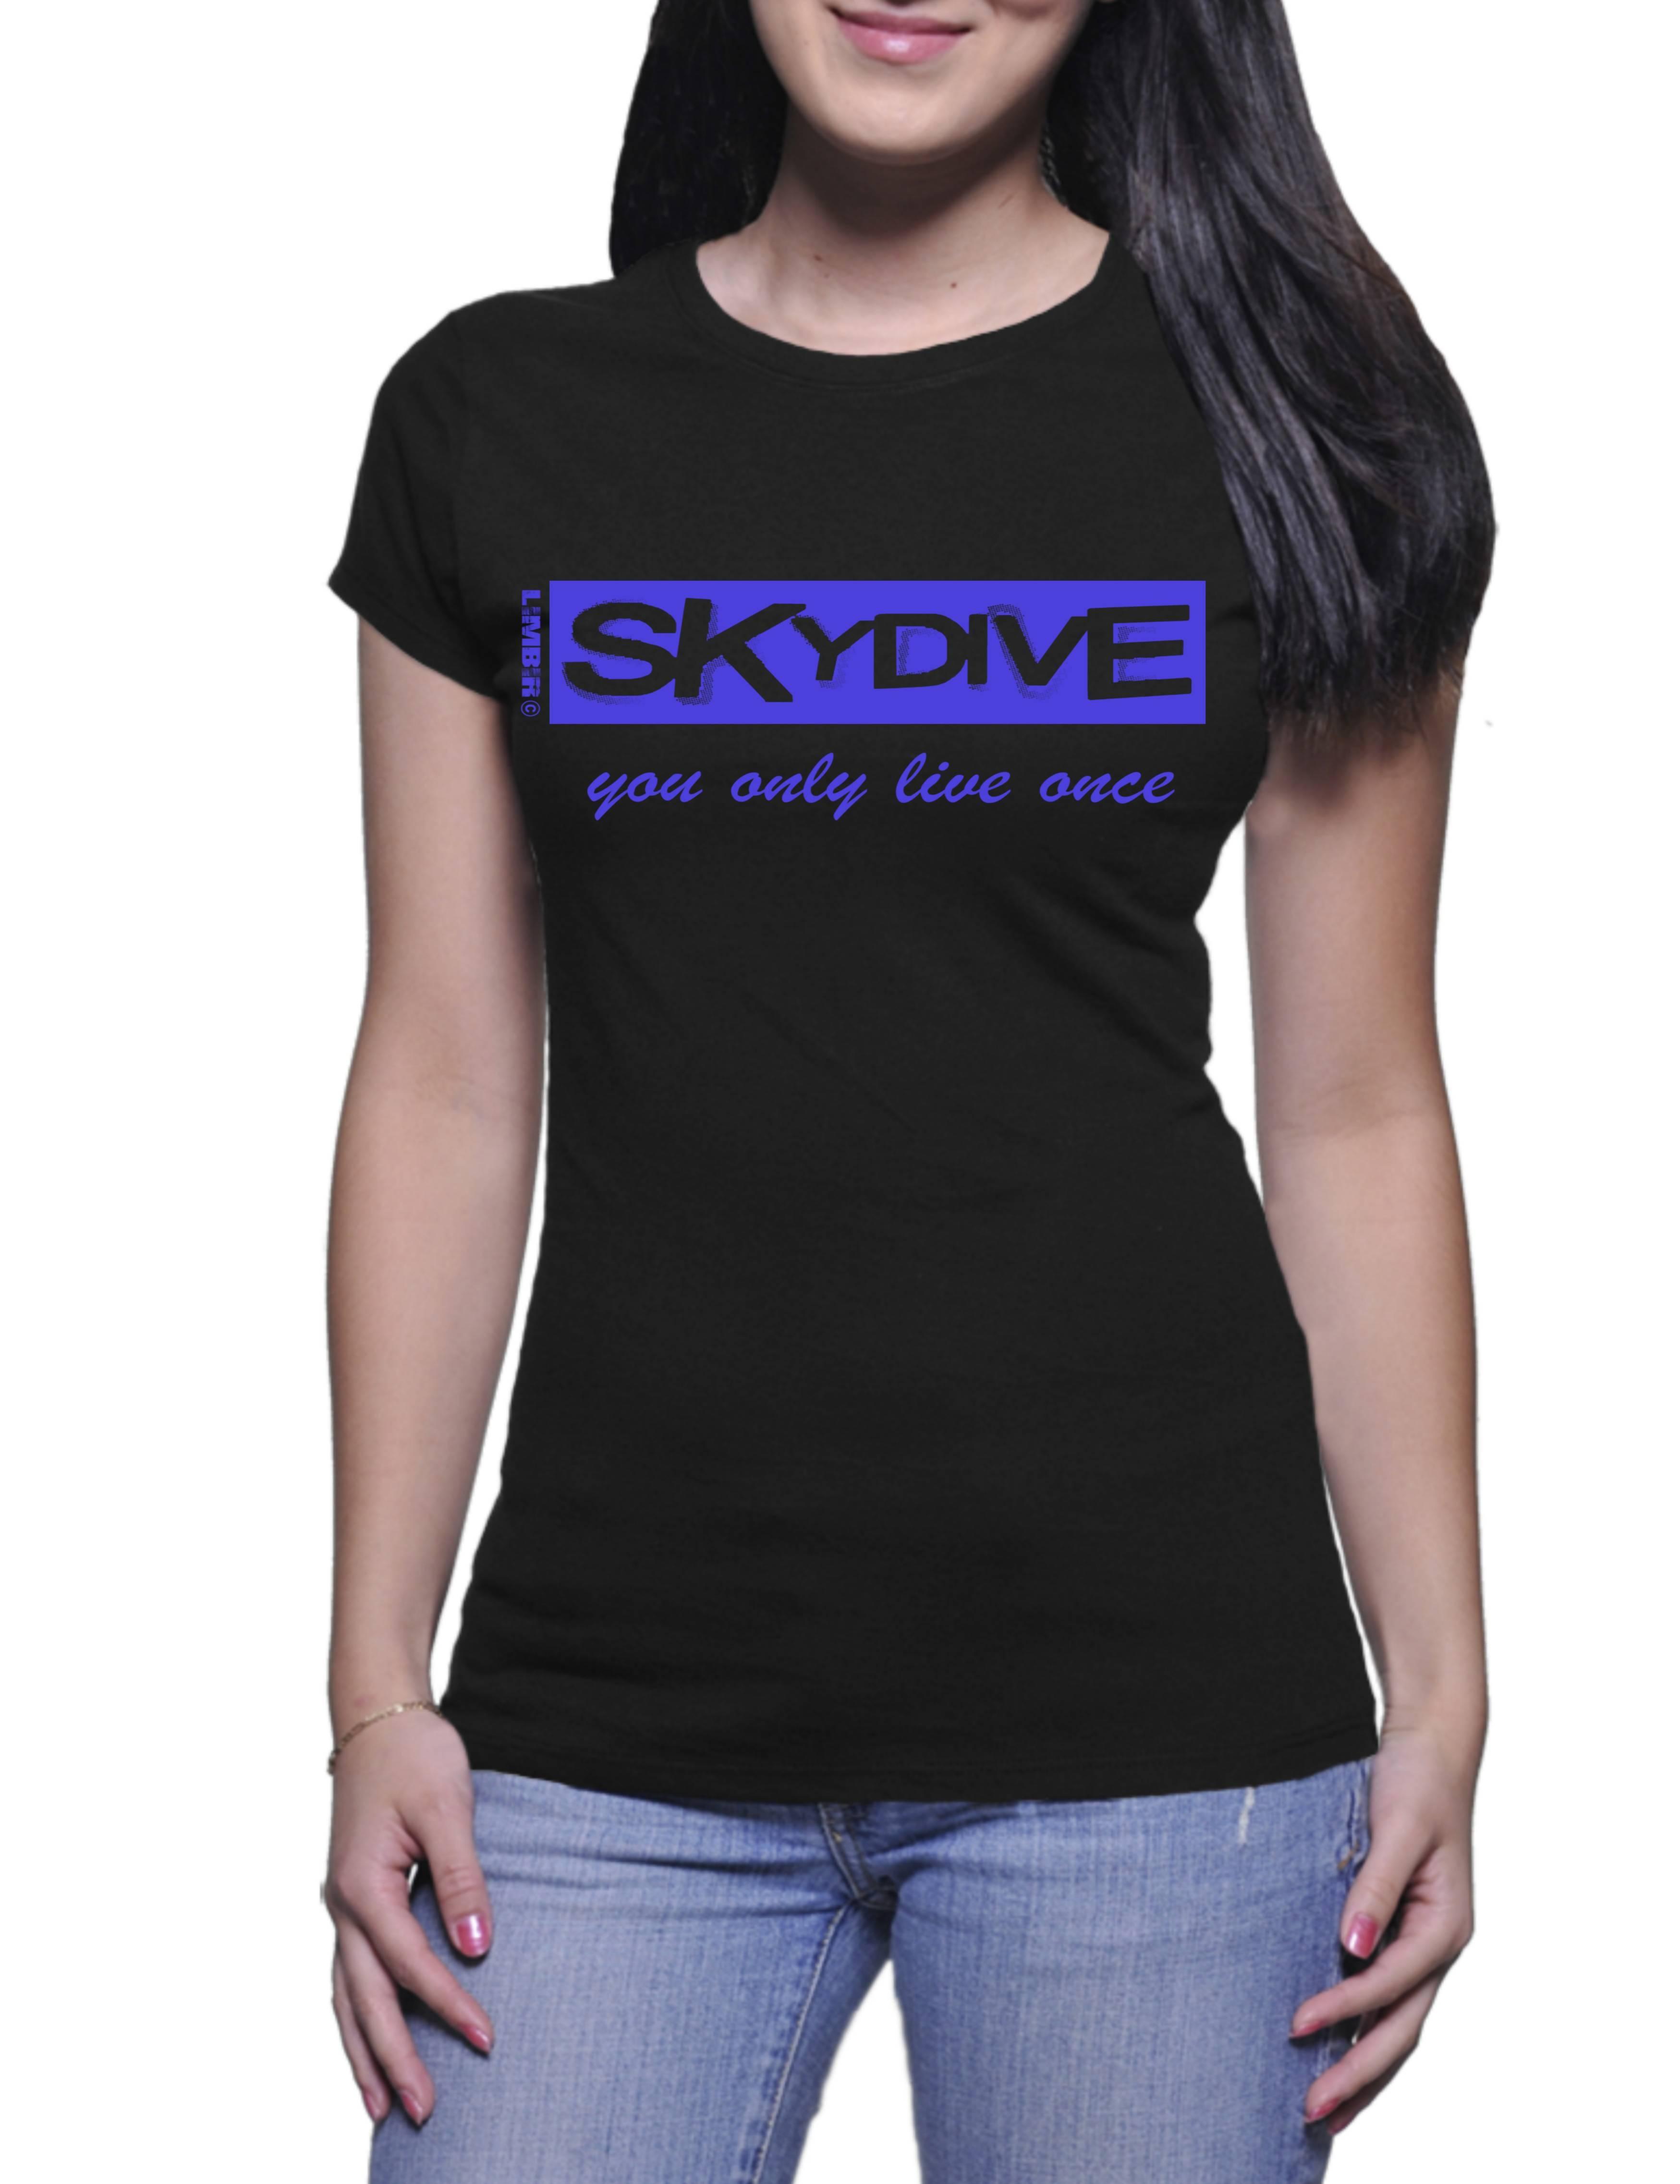 Skydive You Only Live Once - Ladies t-shirt (Limbir FlyWear) D3